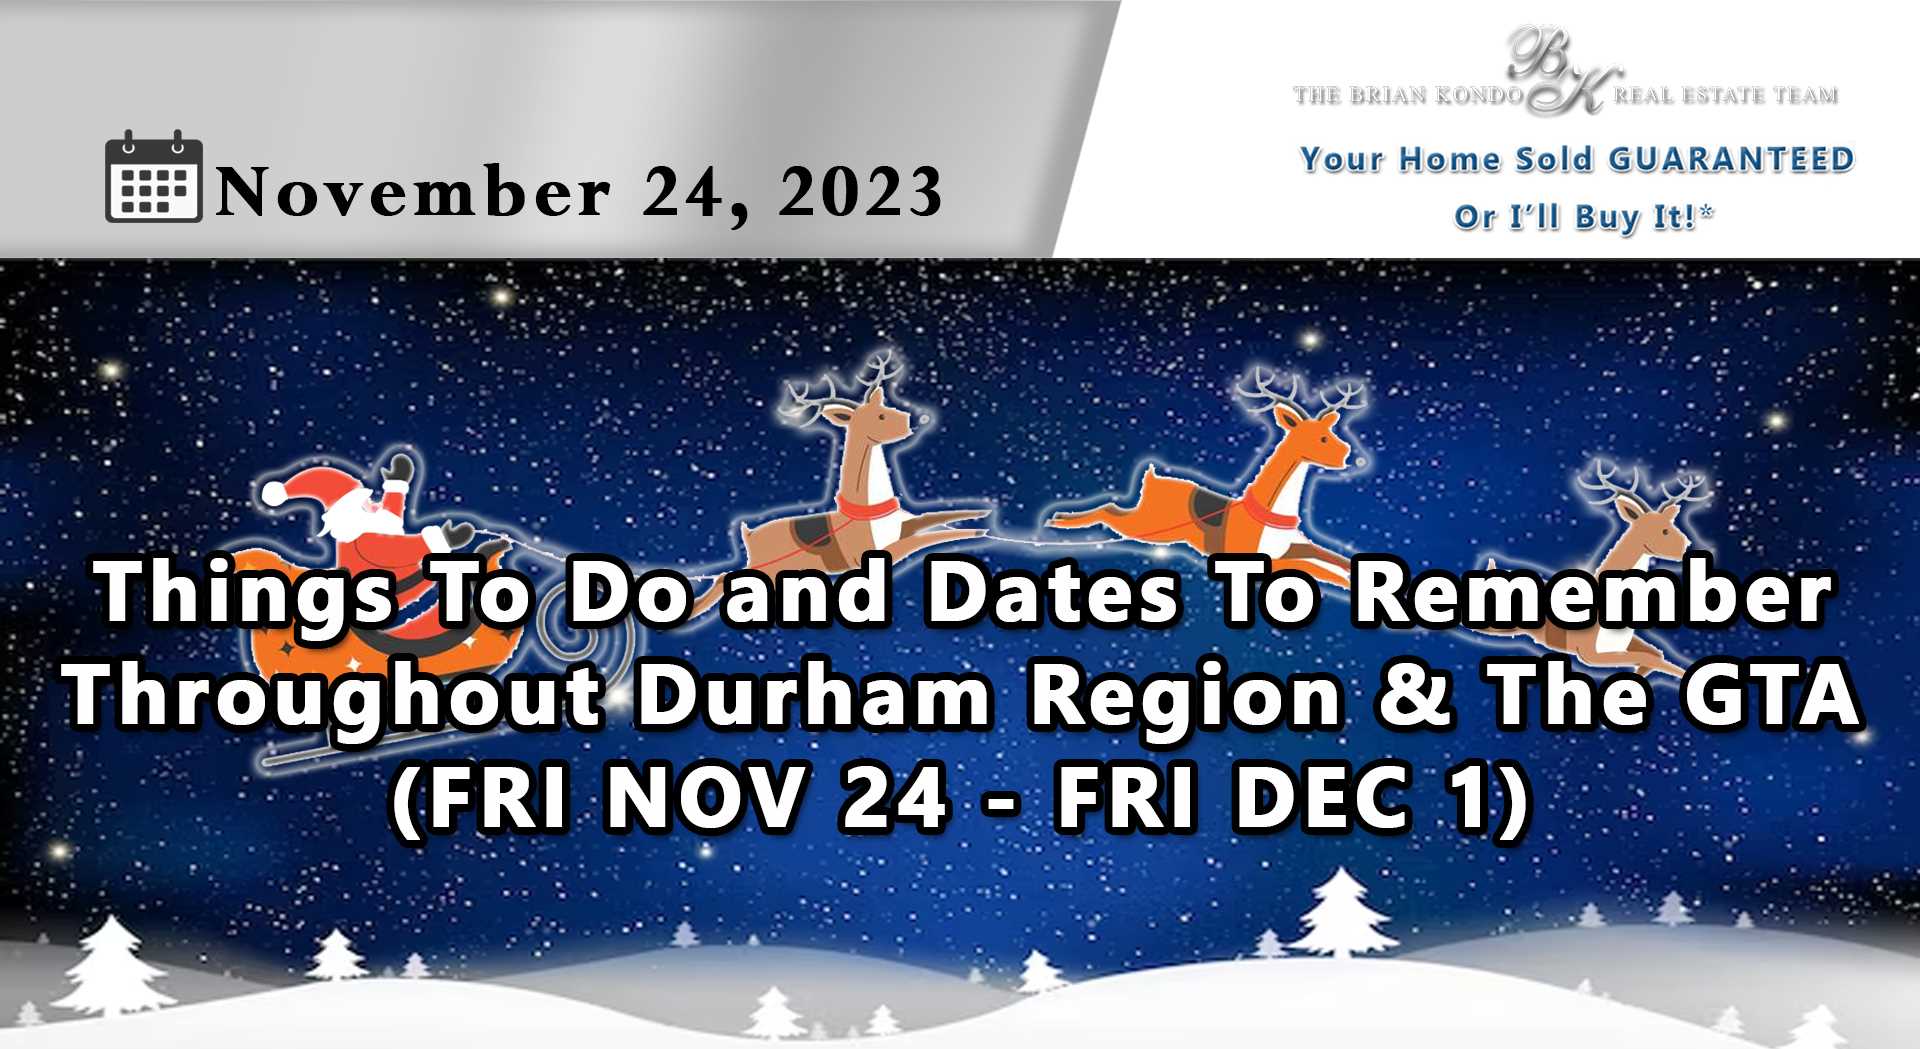 Things To Do Throughout Durham Region and The GTA For The Upcoming Week (FRI NOV 24 - FRI DEC 1)